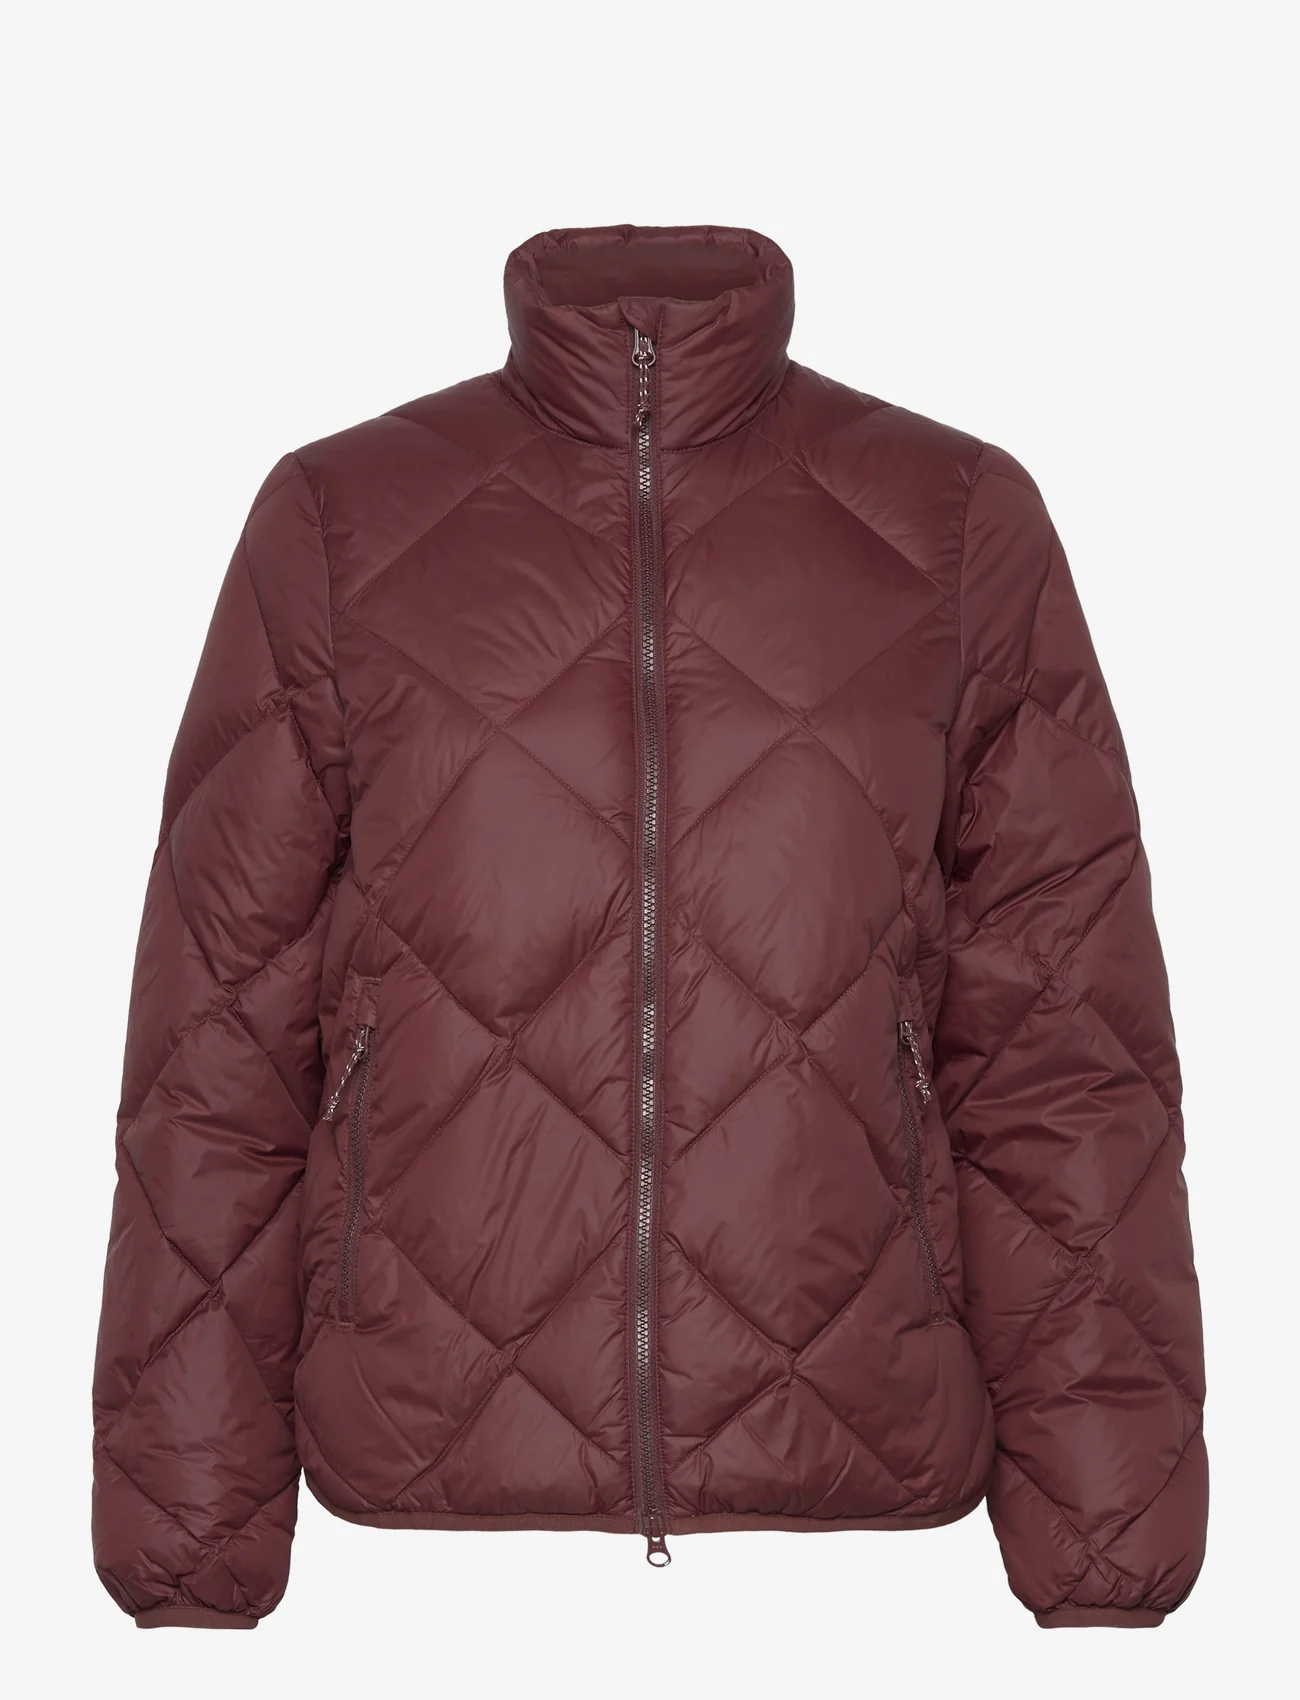 Peak Performance - W Mount Down Liner Jacket-SAPOTE - quilted jakker - sapote - 0